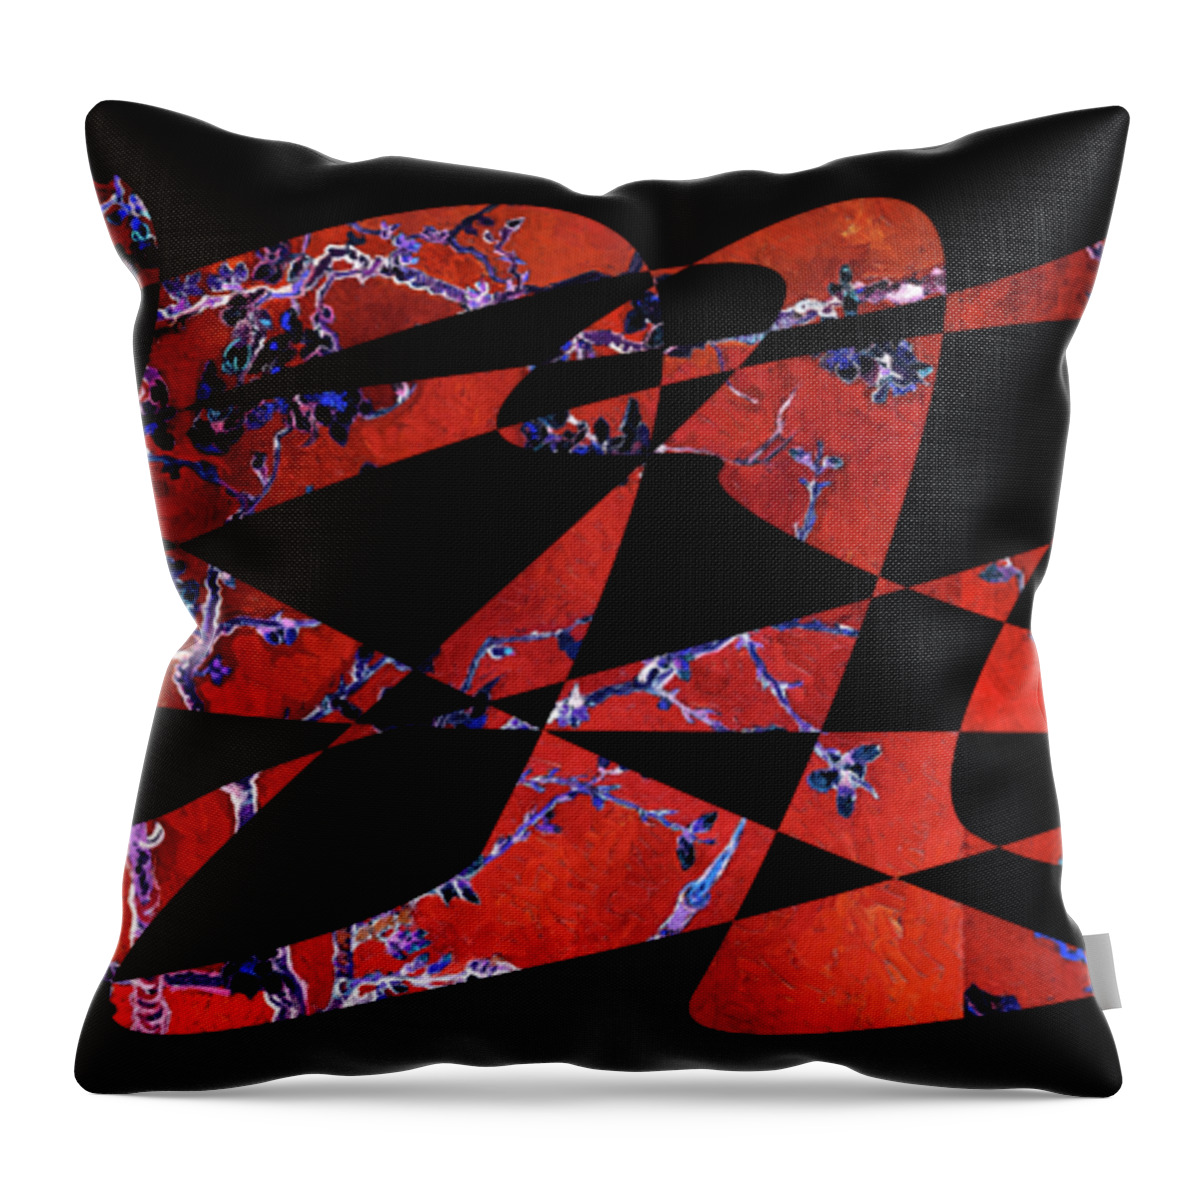 Abstract In The Living Room Throw Pillow featuring the digital art American Intellectual 6 by David Bridburg